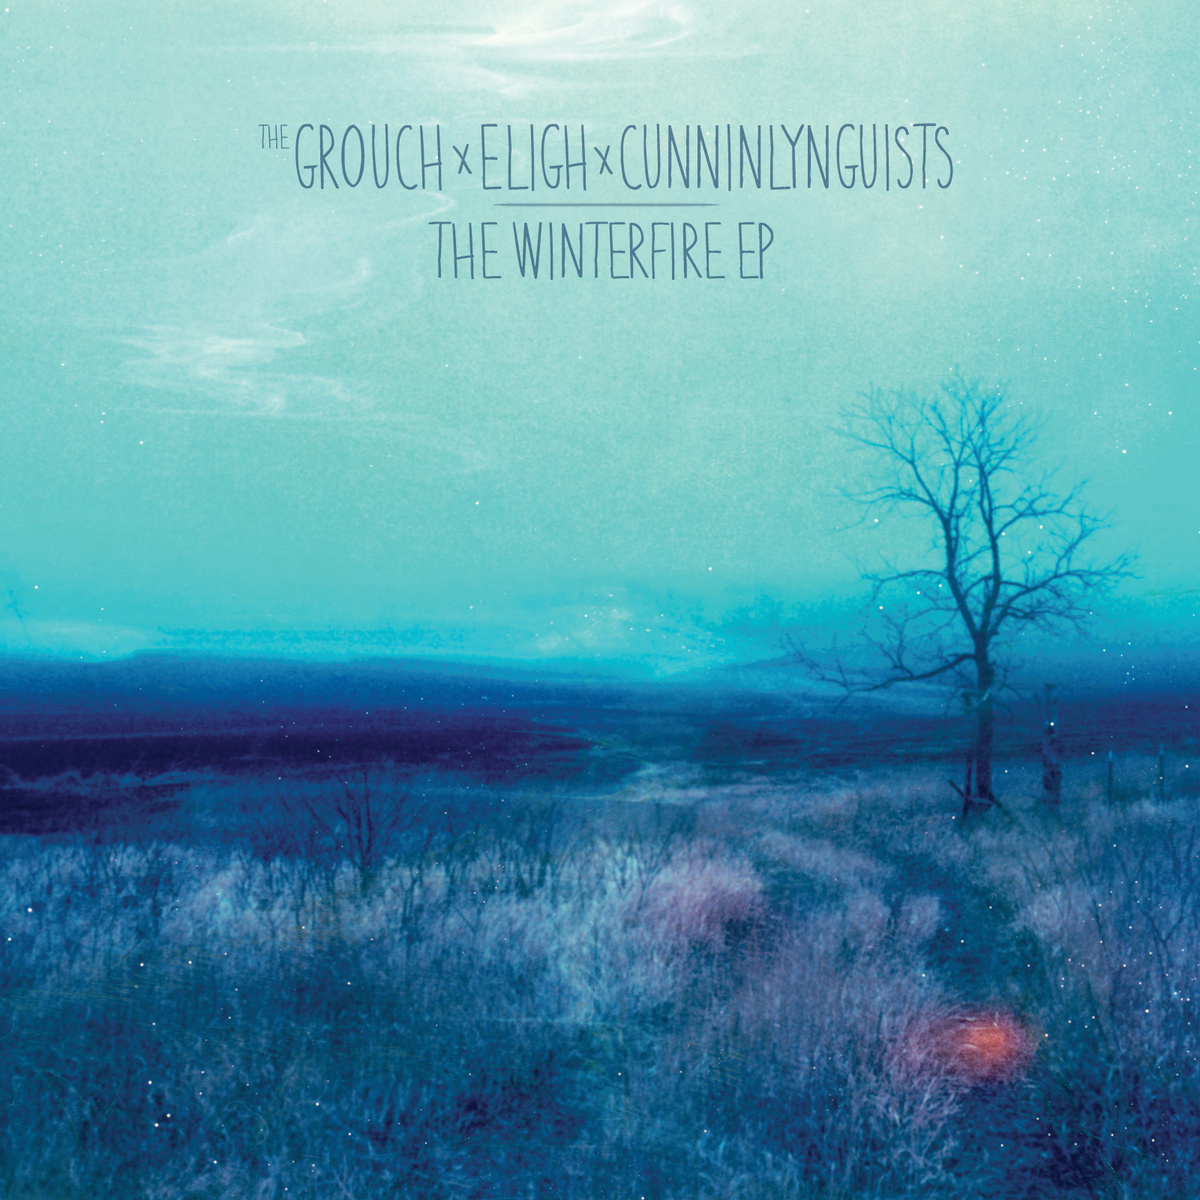 Listen: CunninLynguists, The Grouch & Eligh – The Winterfire EP